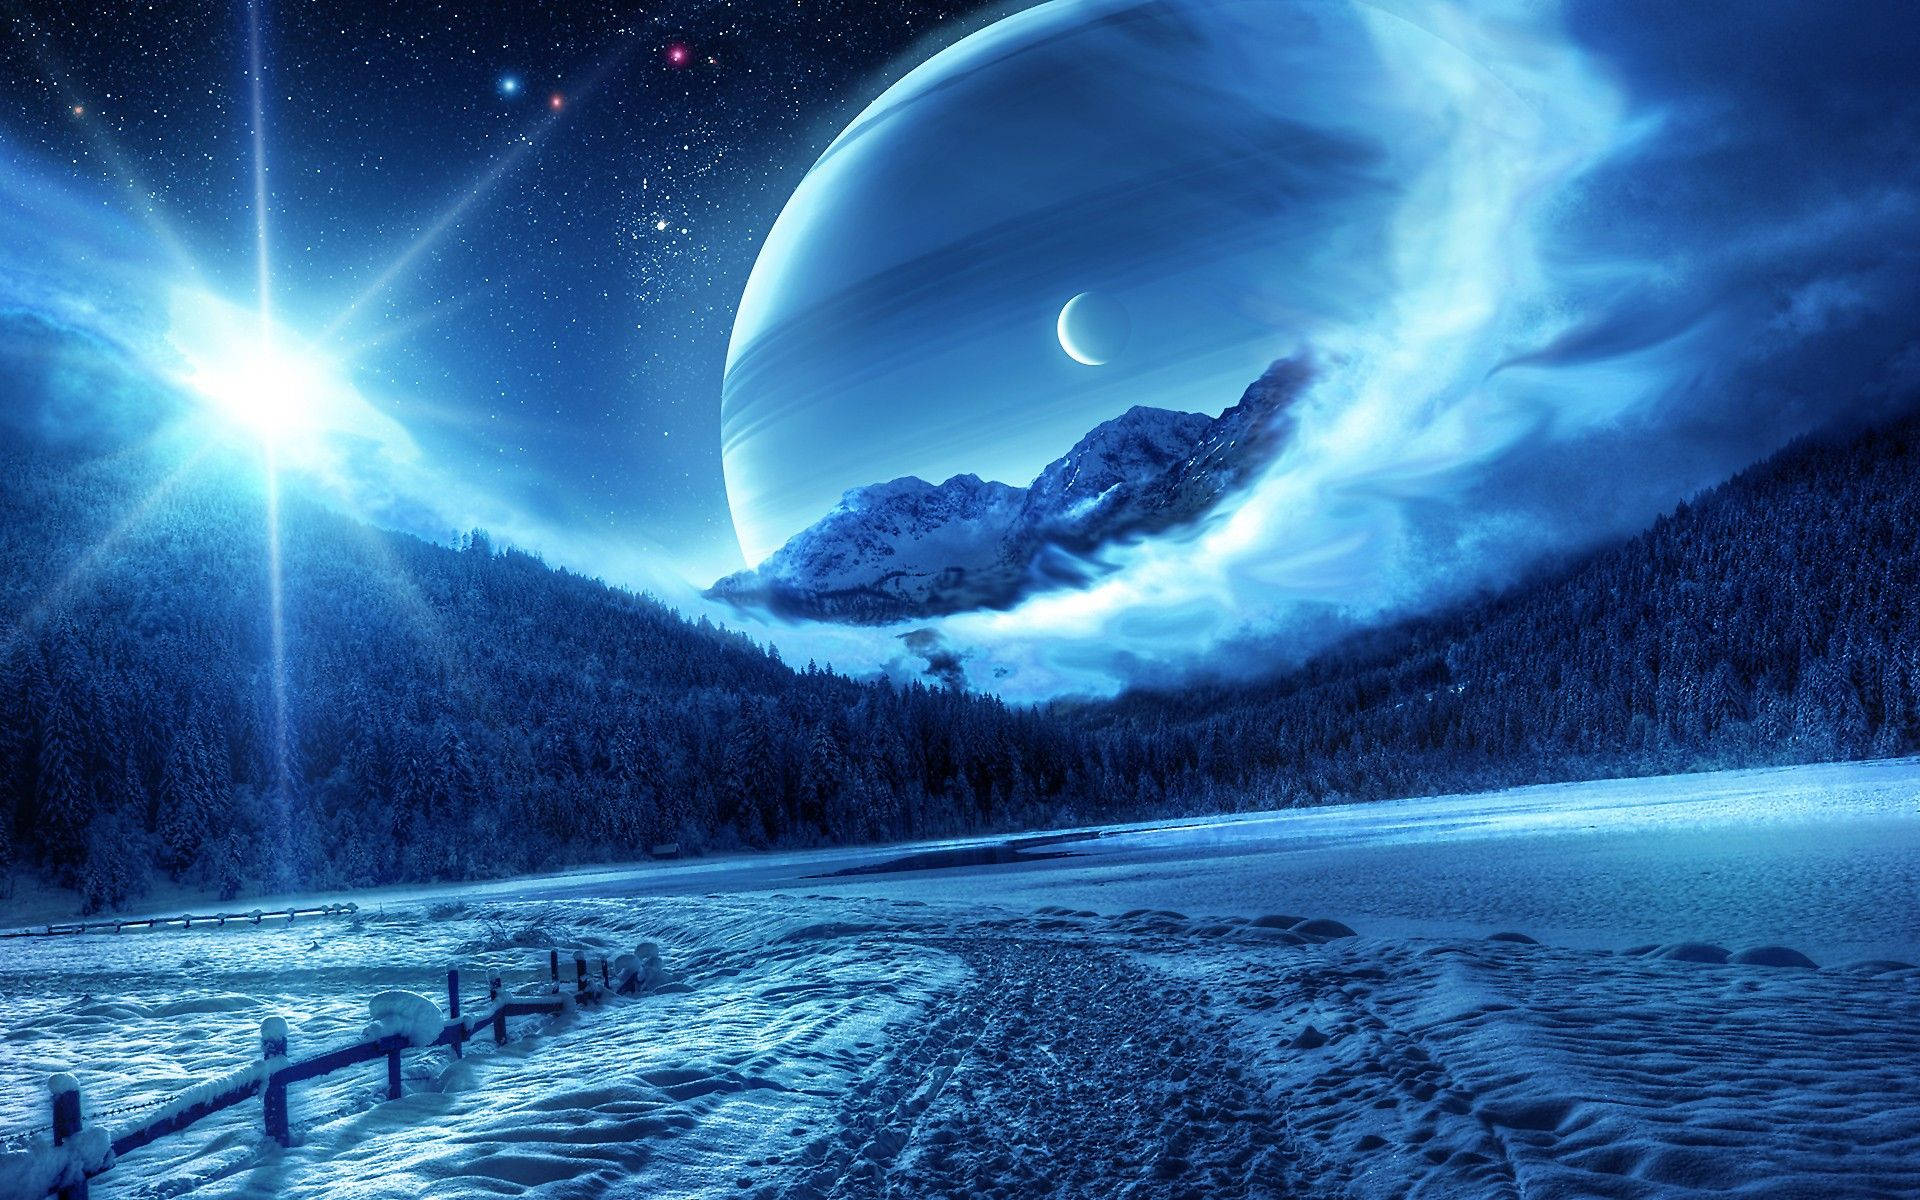 "Relax and Unwind with This Breathtaking Blue Anime Scenery" Wallpaper